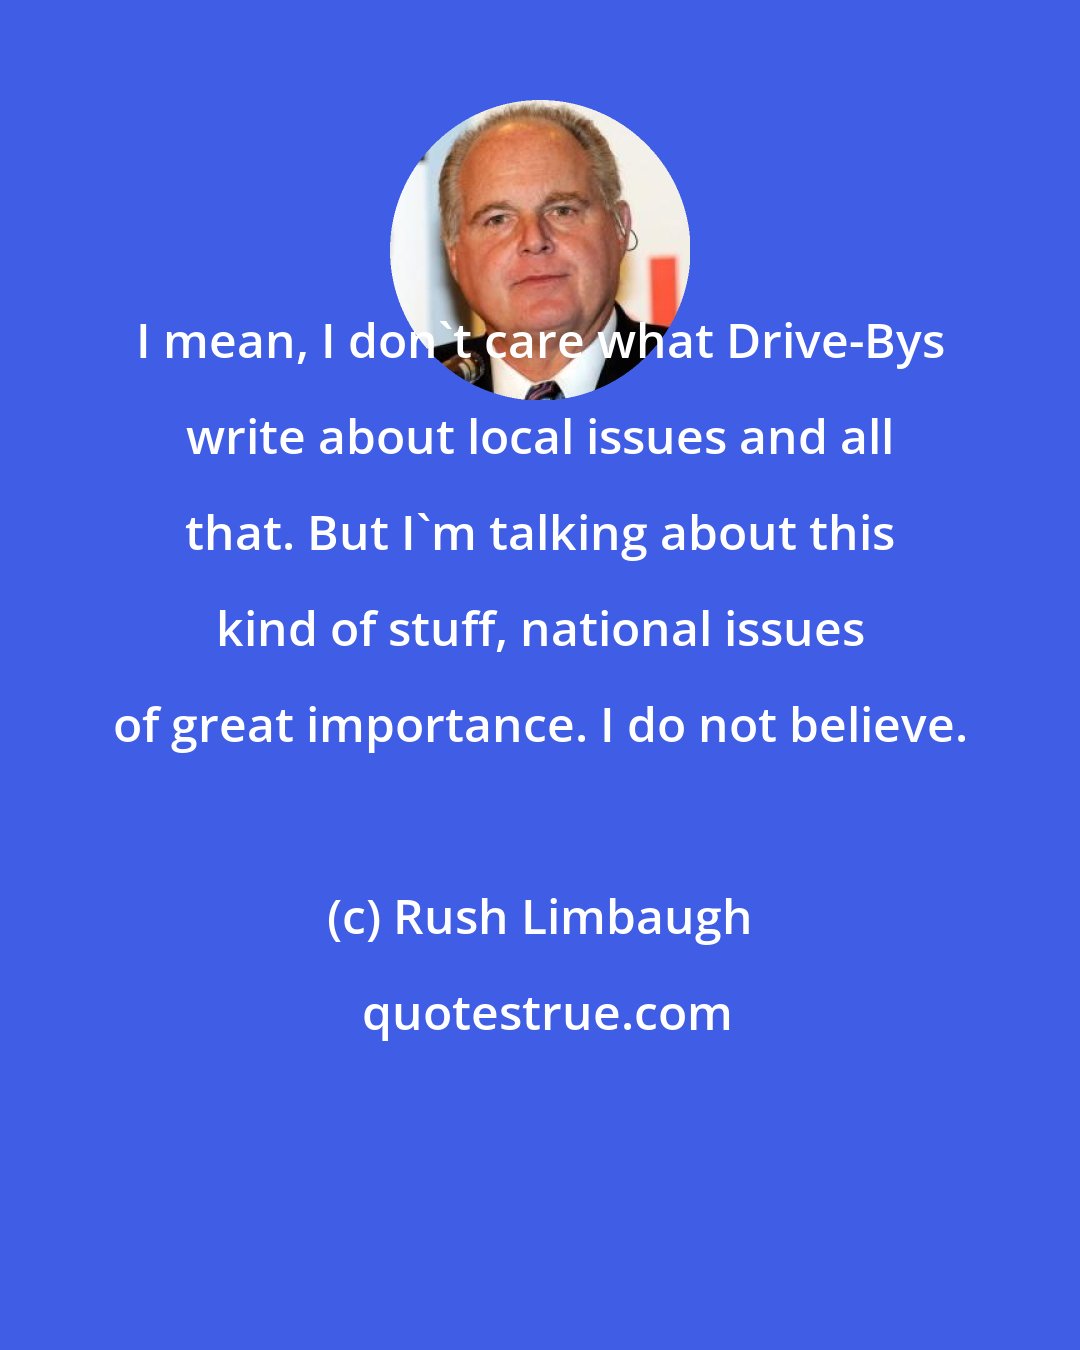 Rush Limbaugh: I mean, I don't care what Drive-Bys write about local issues and all that. But I'm talking about this kind of stuff, national issues of great importance. I do not believe.